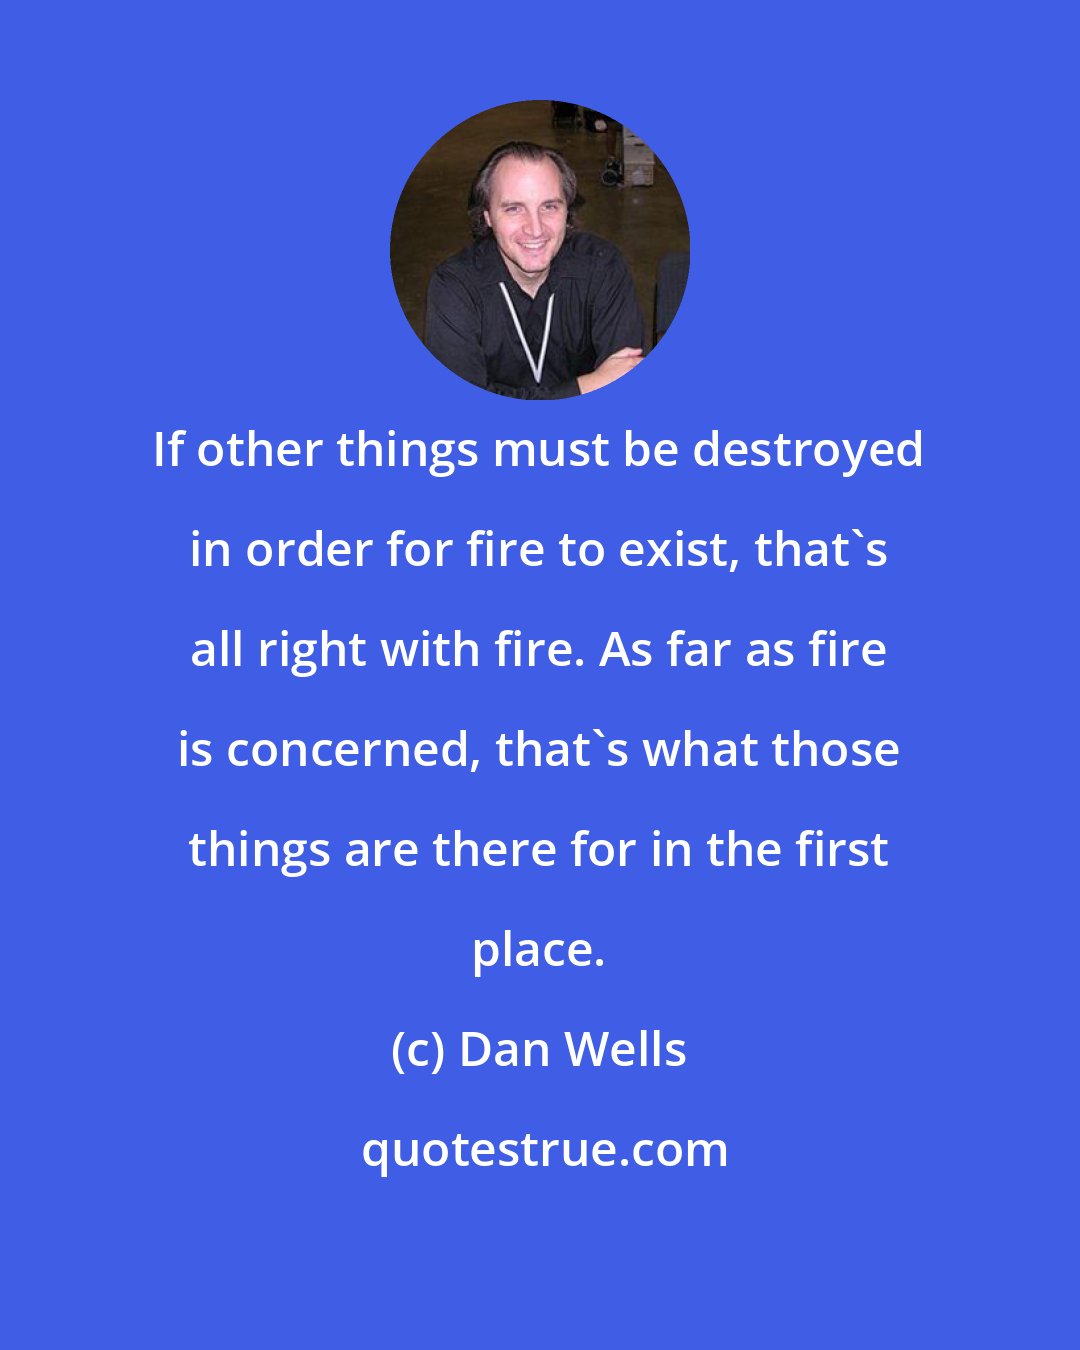 Dan Wells: If other things must be destroyed in order for fire to exist, that's all right with fire. As far as fire is concerned, that's what those things are there for in the first place.